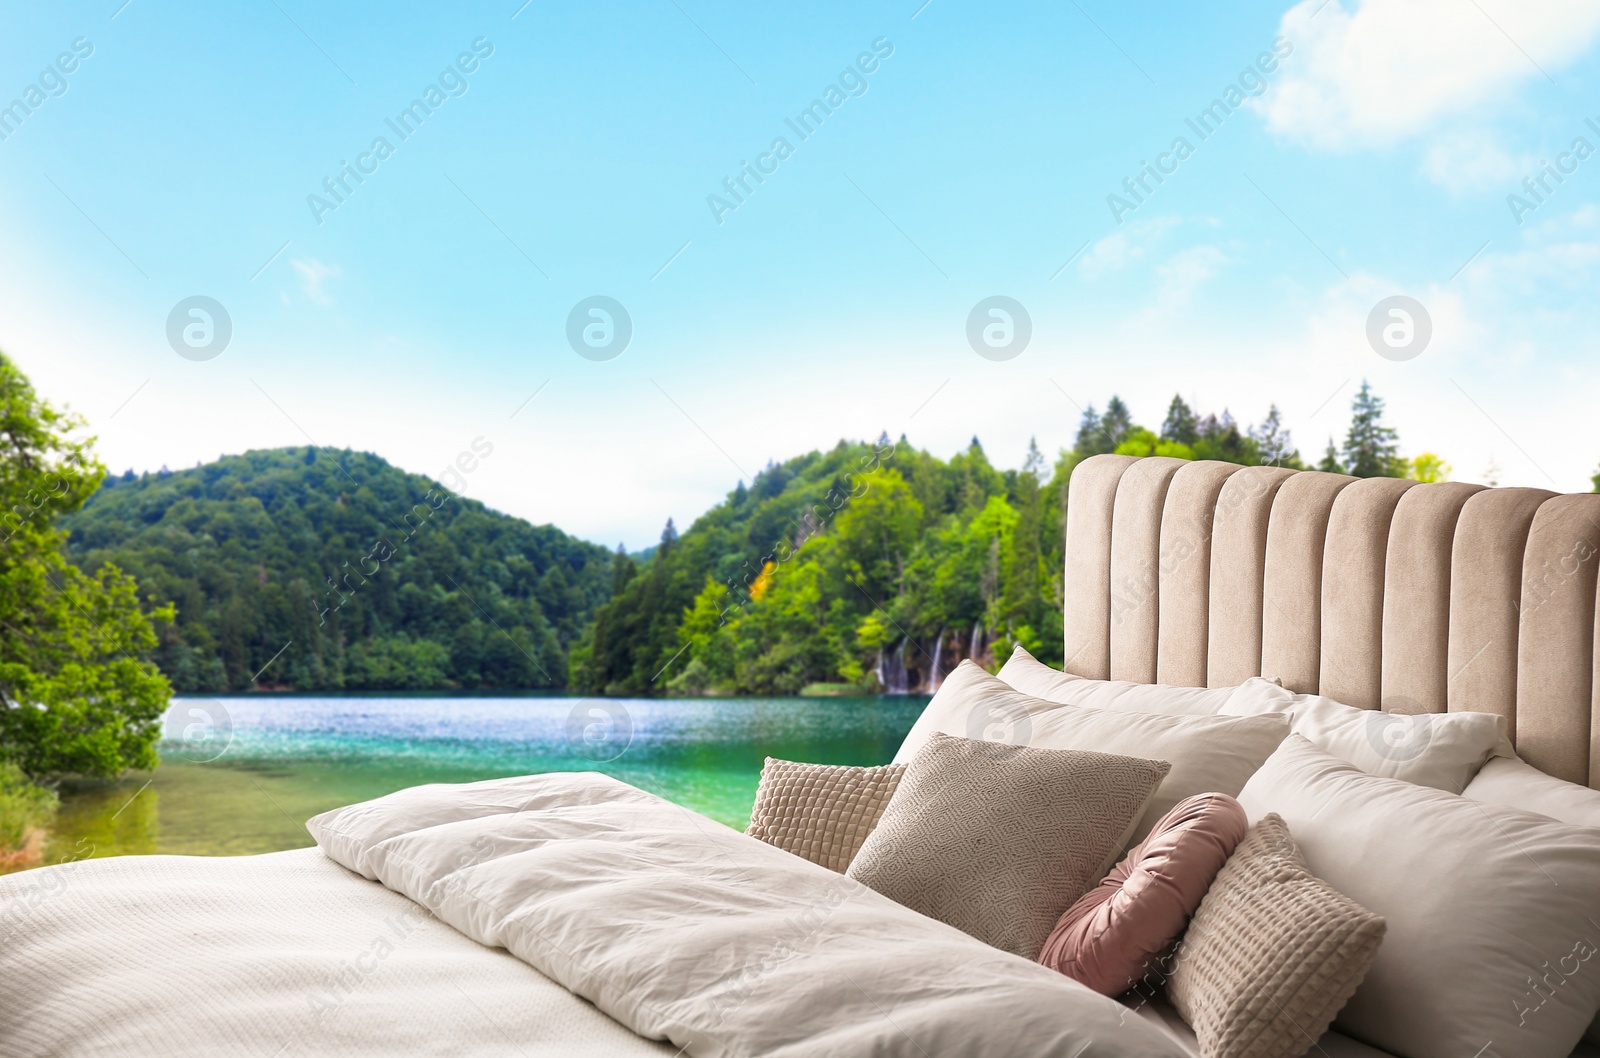 Image of Comfortable bed with soft pillows and picturesque view of river and mountains on background